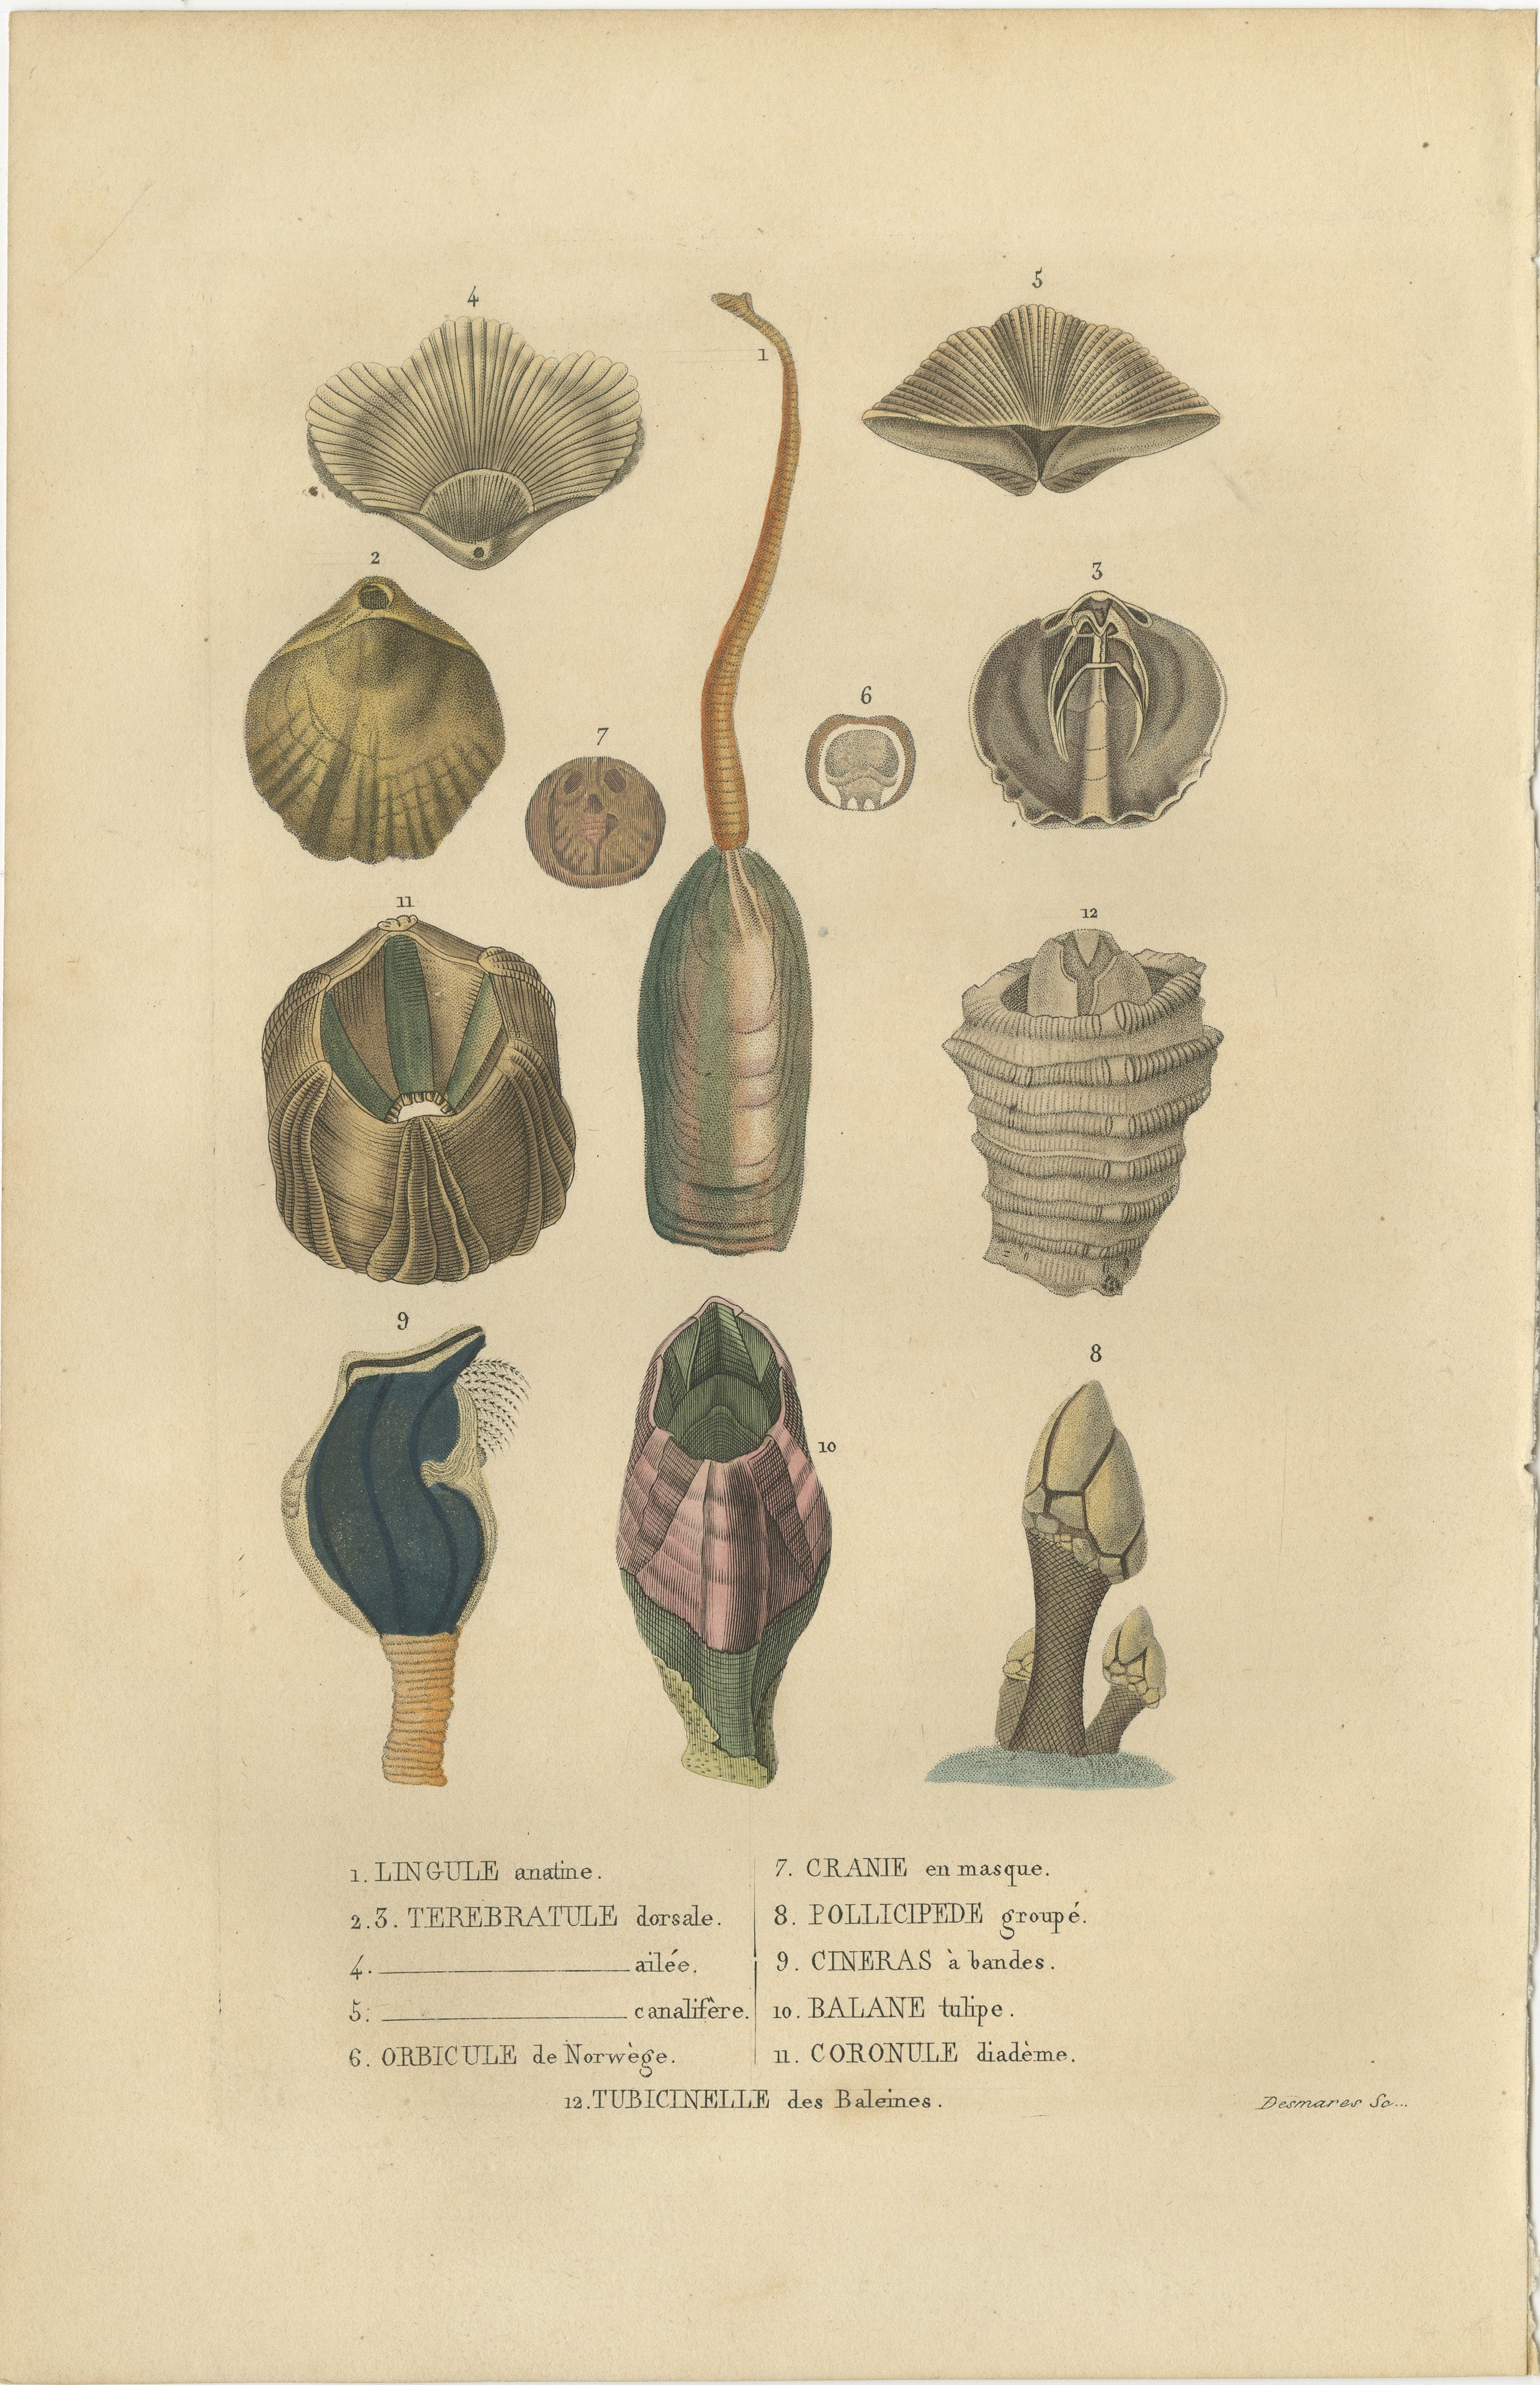 The illustration, an original hand-colored engraving,  features a collection of shells and marine organisms, likely from various classes of the phylum Mollusca:

1. **Lingule anatine** - This could represent Lingula anatina, a species of brachiopod,